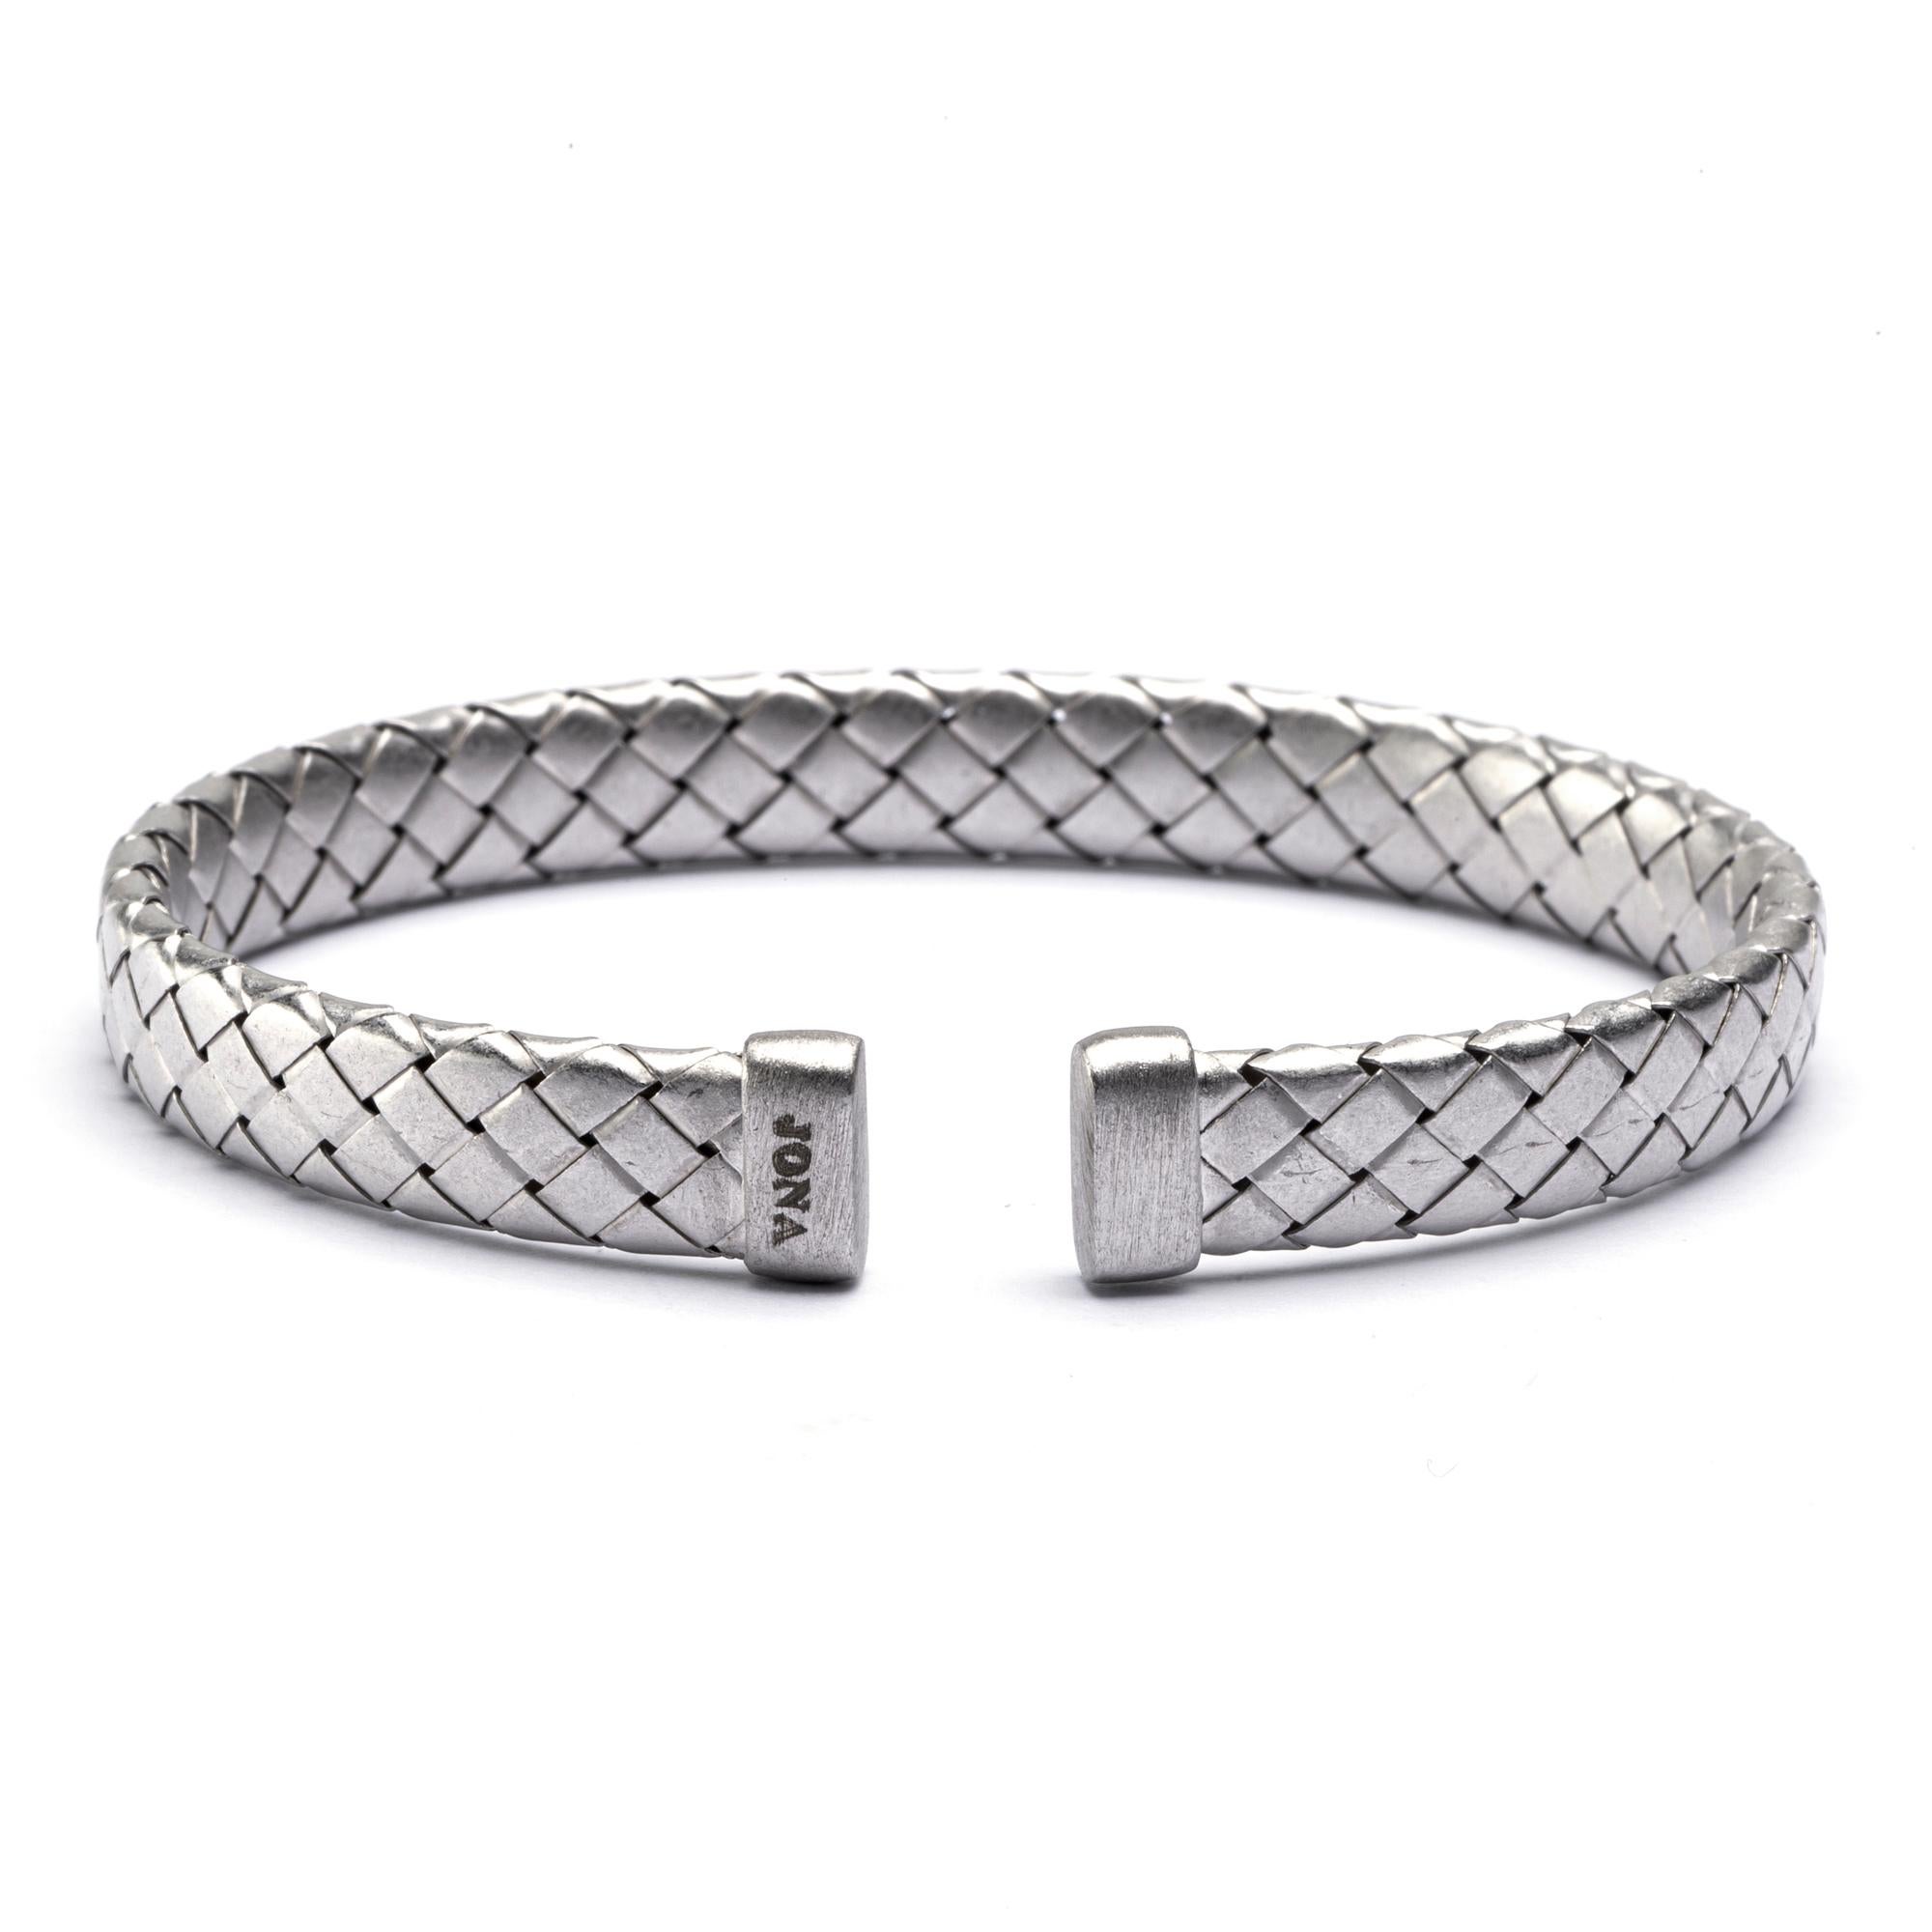 Platinum Sterling Silver Hand Made Italian Cable Cuff Woven Bangle Bracelet Gift 